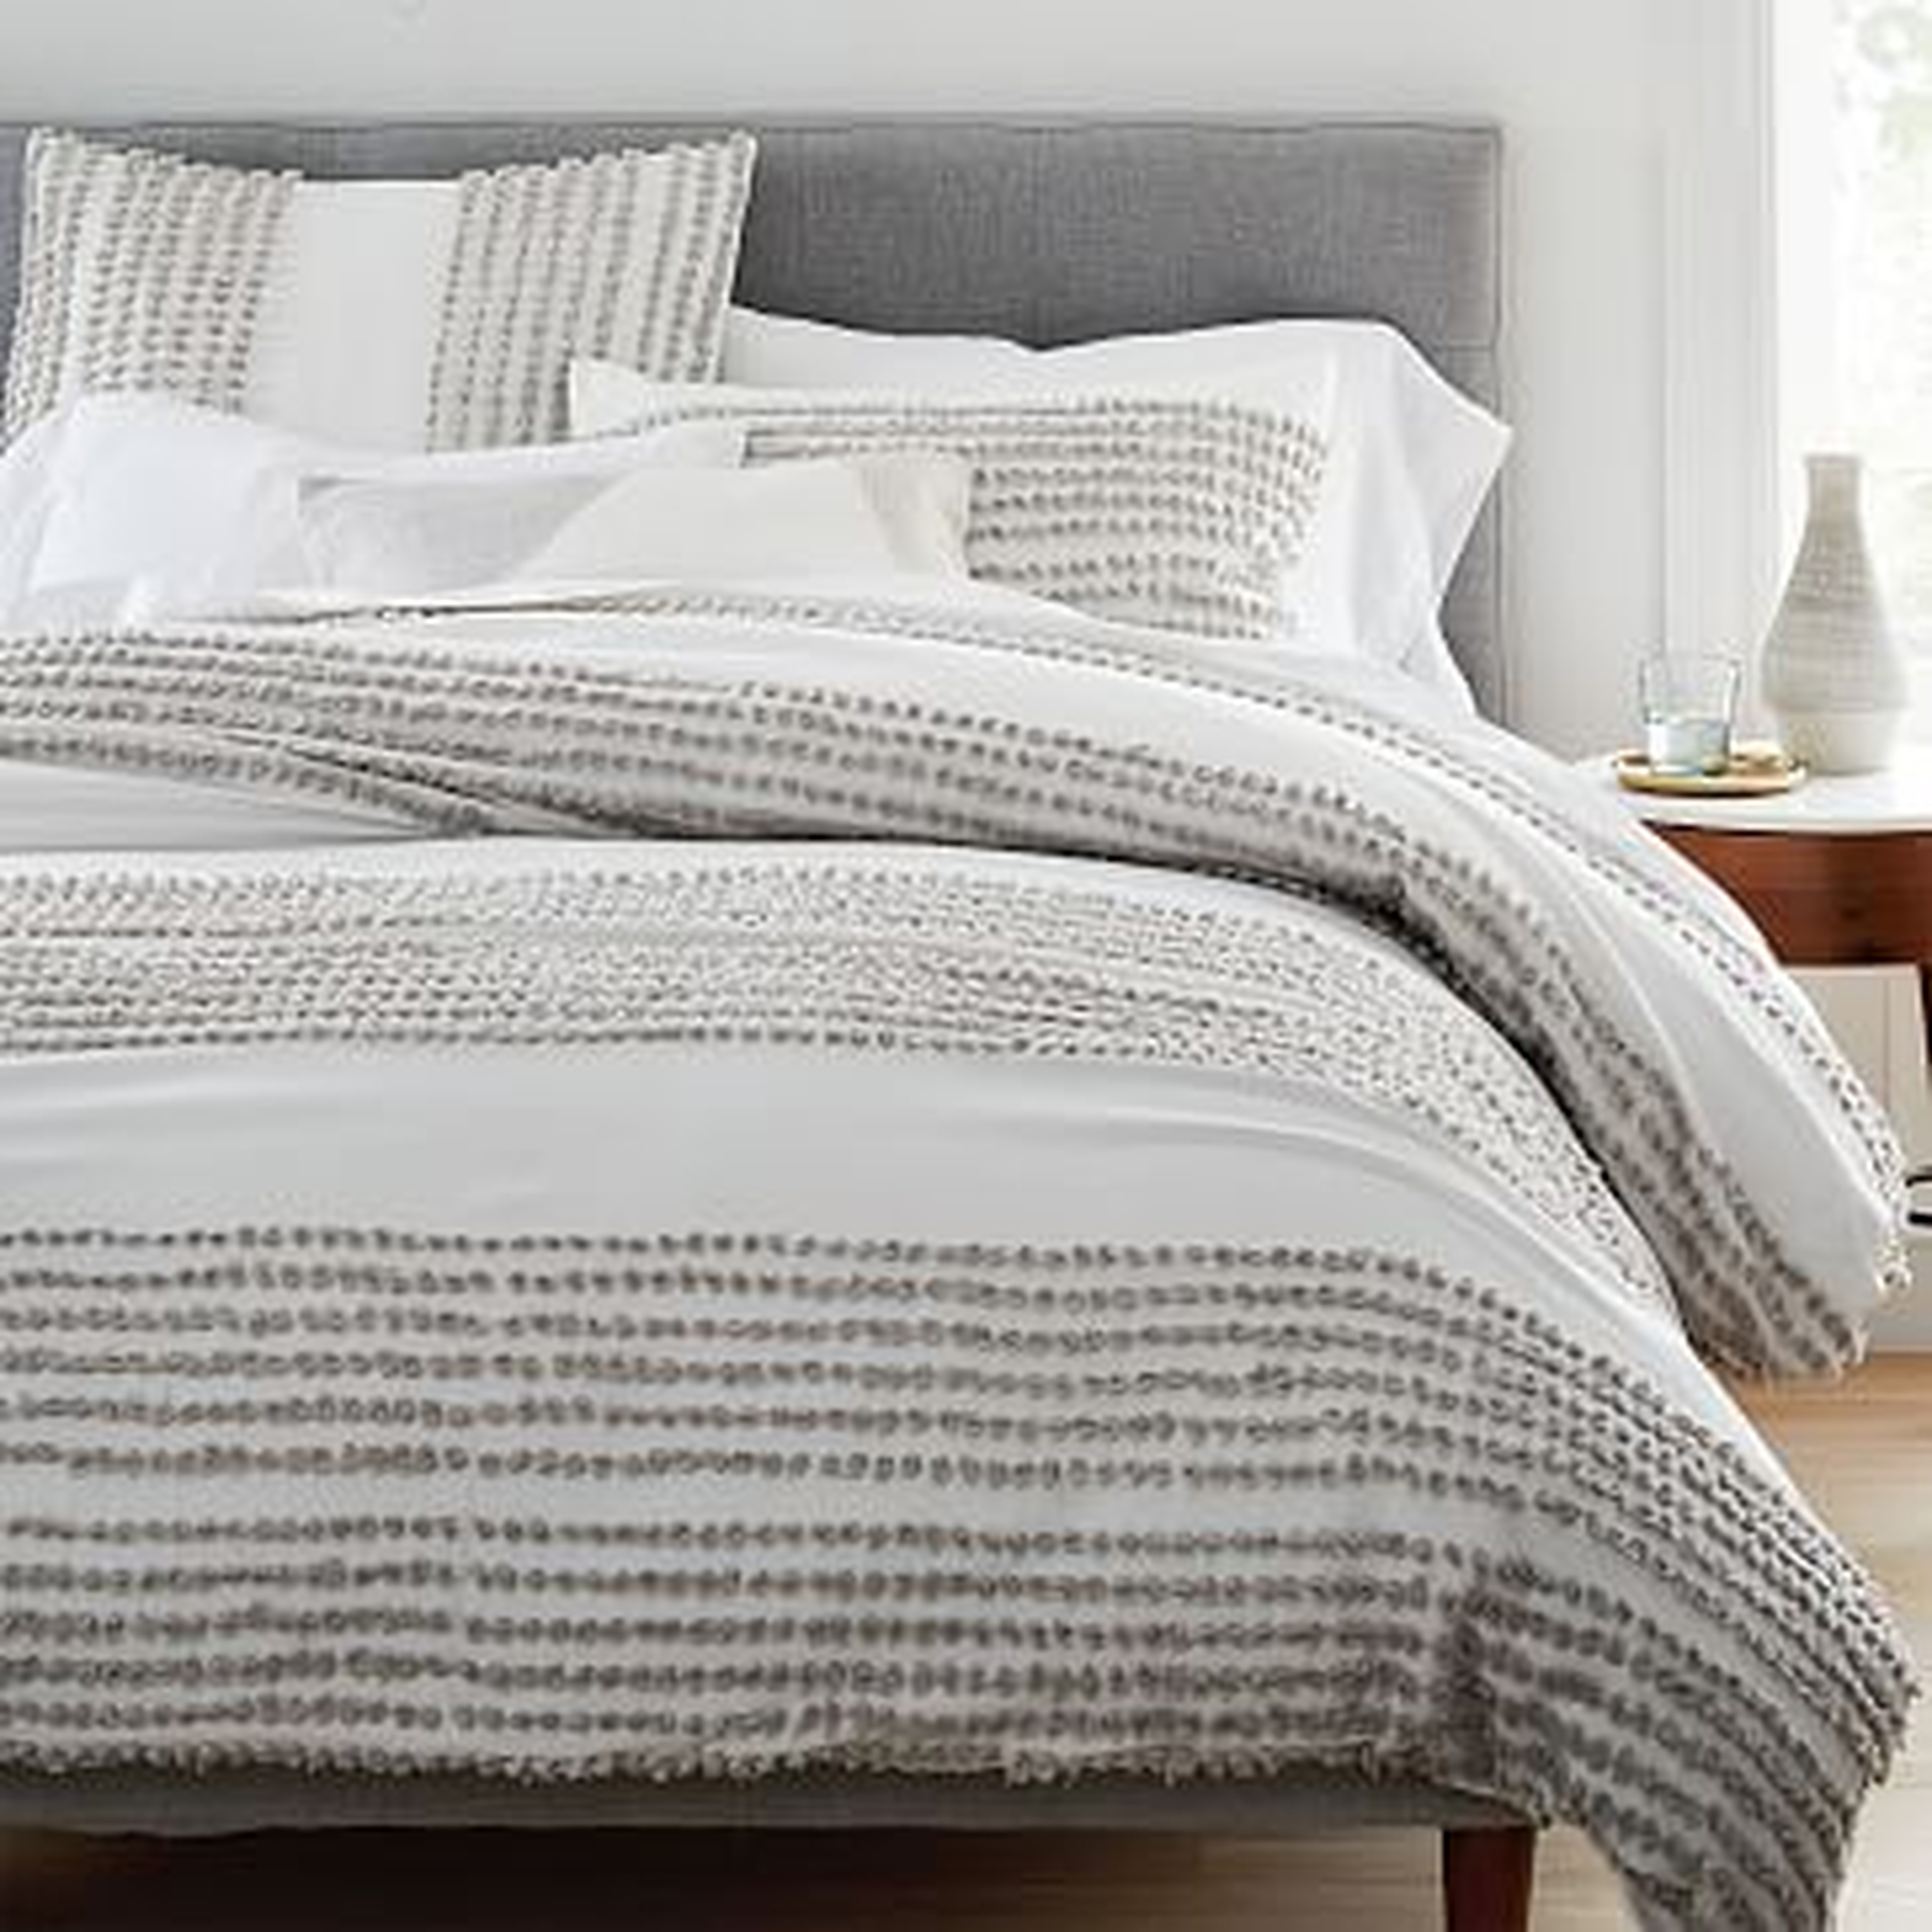 Candlewick Duvet Cover - Stone Gray - West Elm